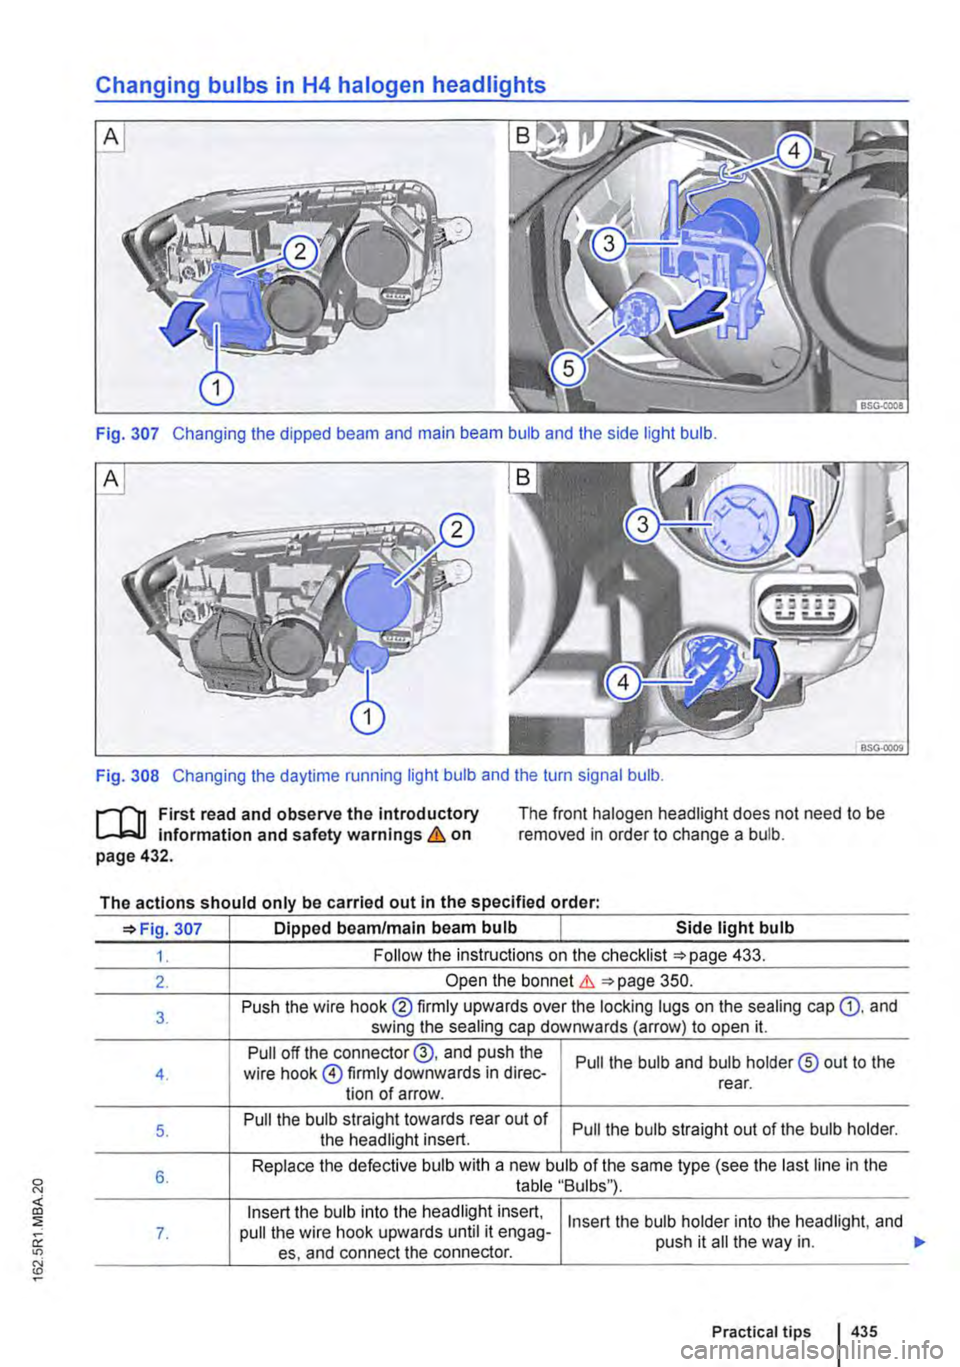 VOLKSWAGEN TRANSPORTER 2010  Owners Manual Changing bulbs in H4 halogen headlights 
Fig. 307 Changing the dipped beam and main beam bulb and the side light bulb. 
Fig. 308 Changing the daytime running light bulb and the turn signal bulb. 
r-f"